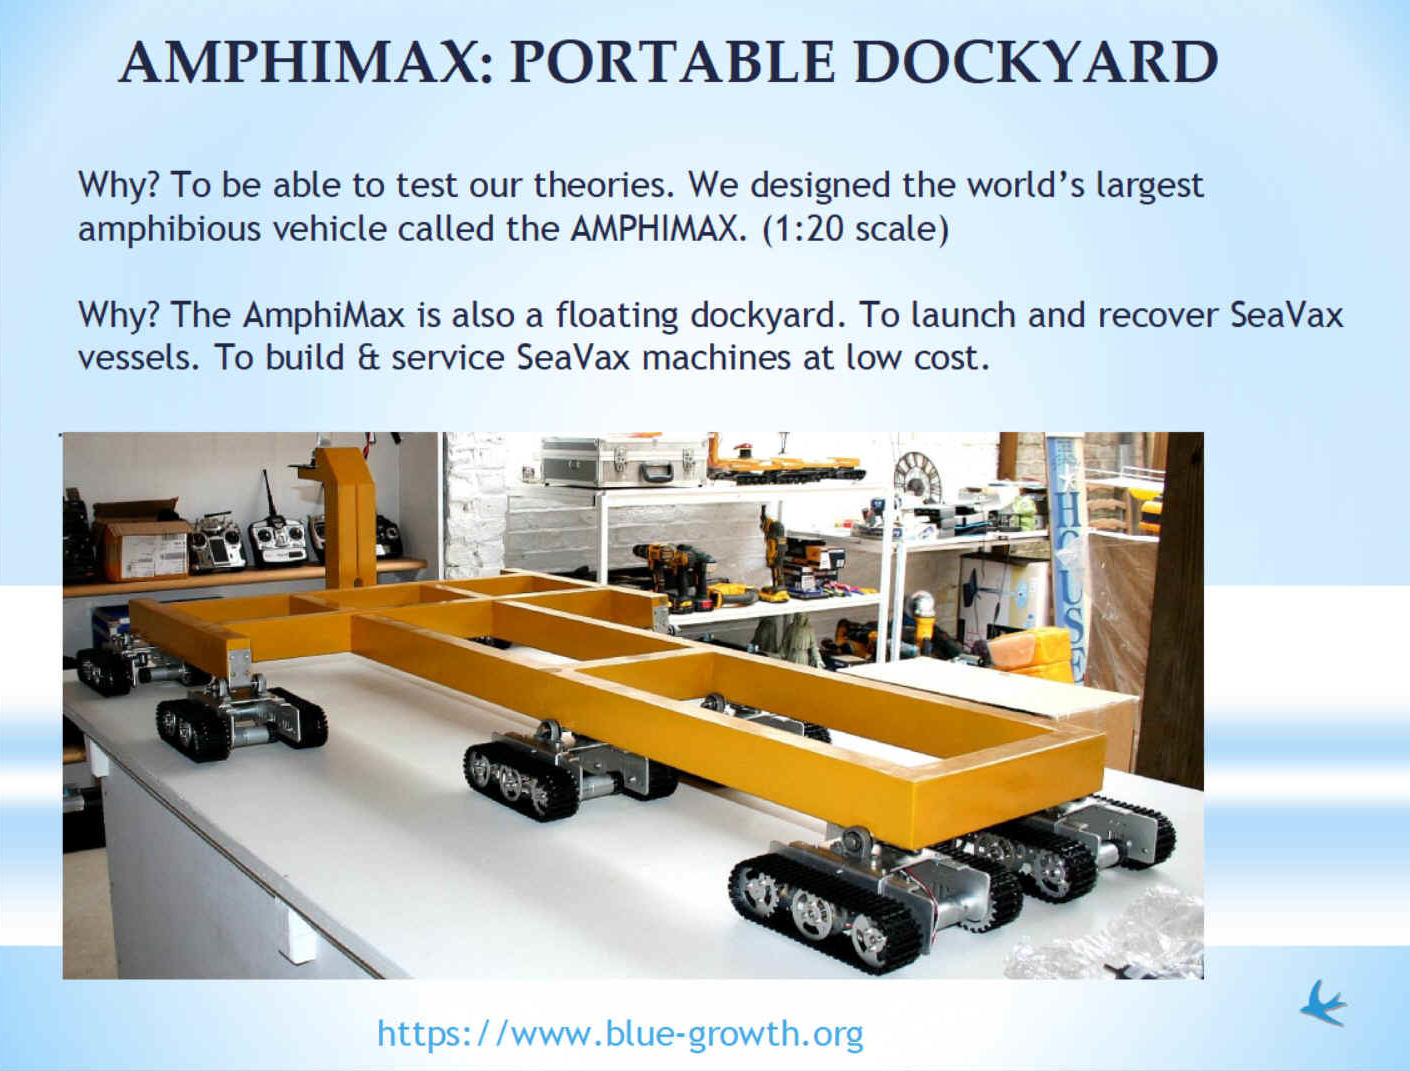 AmphiMax is a low cost portable dockyard, the world's largest amphibious vehicle. It can be parked on any suitable beach, when a SeaVax might be assembled from subassemblies. Fitted out with command and control robotics, then launched. This would mean SeaVax could be made anywhere, launched and recovered, for servicing. The system reducing the cost of producing some 300 drone vessels to form an effective SeaNet system. We built and tested a fully working radio controlled proof of concept model at 1:20 scale.